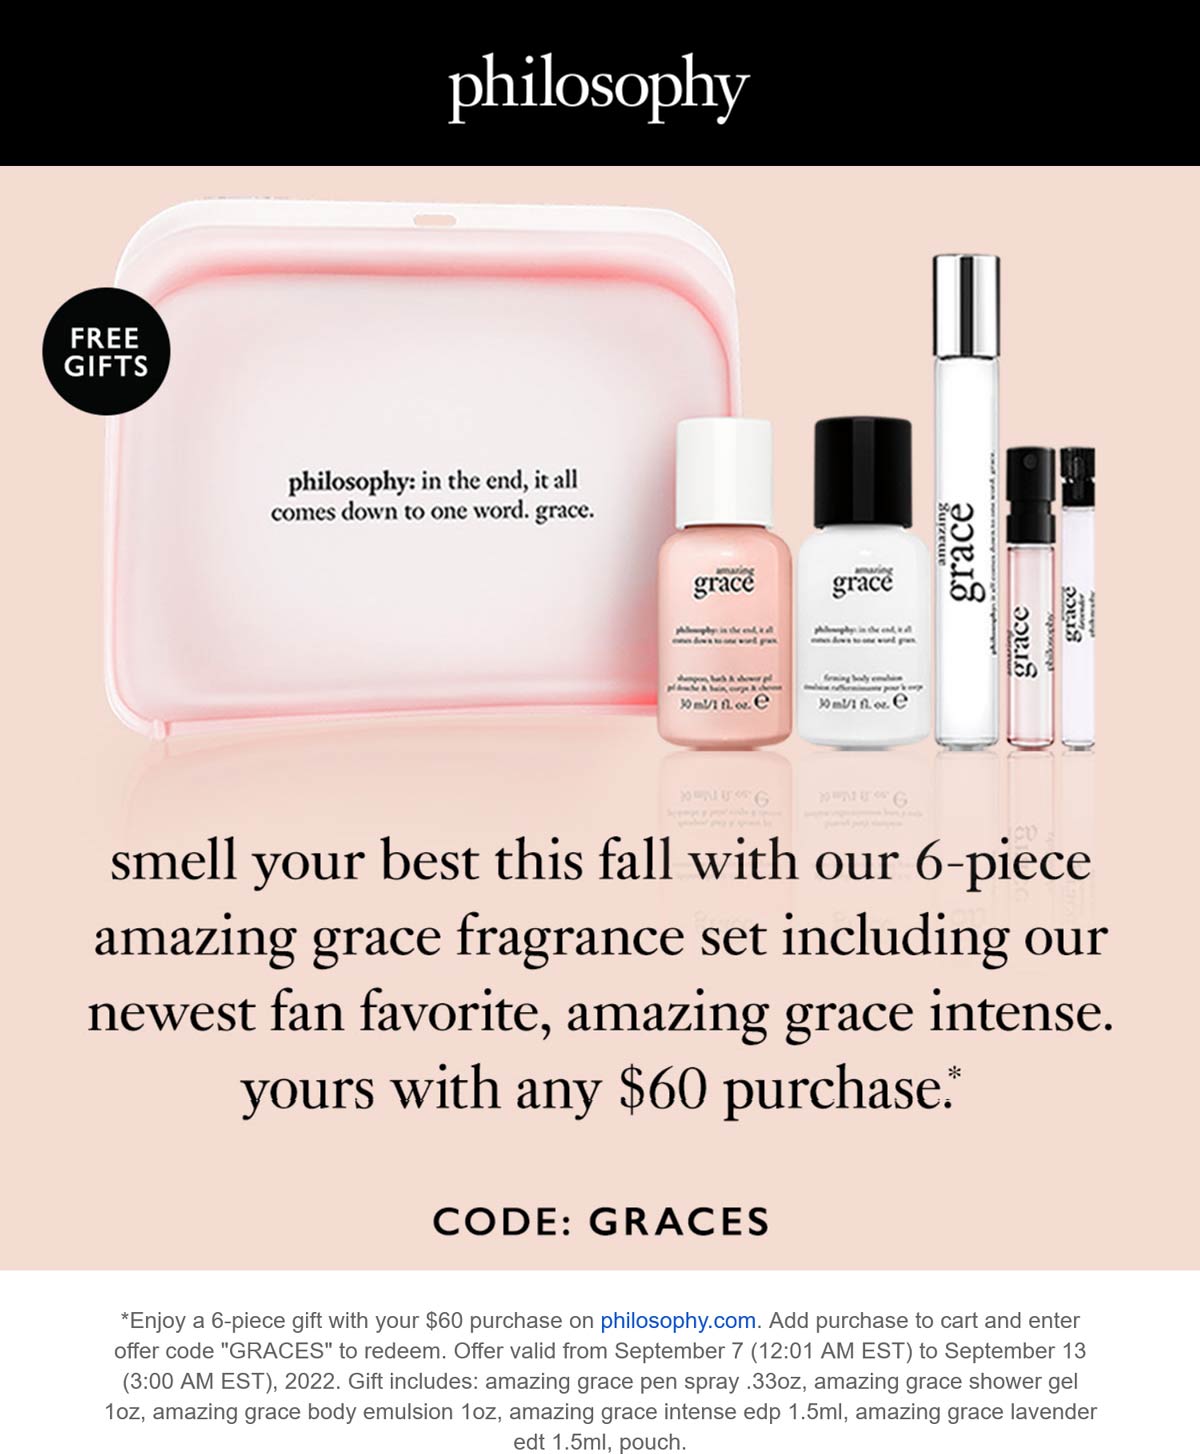 Philosophy stores Coupon  Free 6pc set on $60 at Philosophy via promo code GRACES #philosophy 